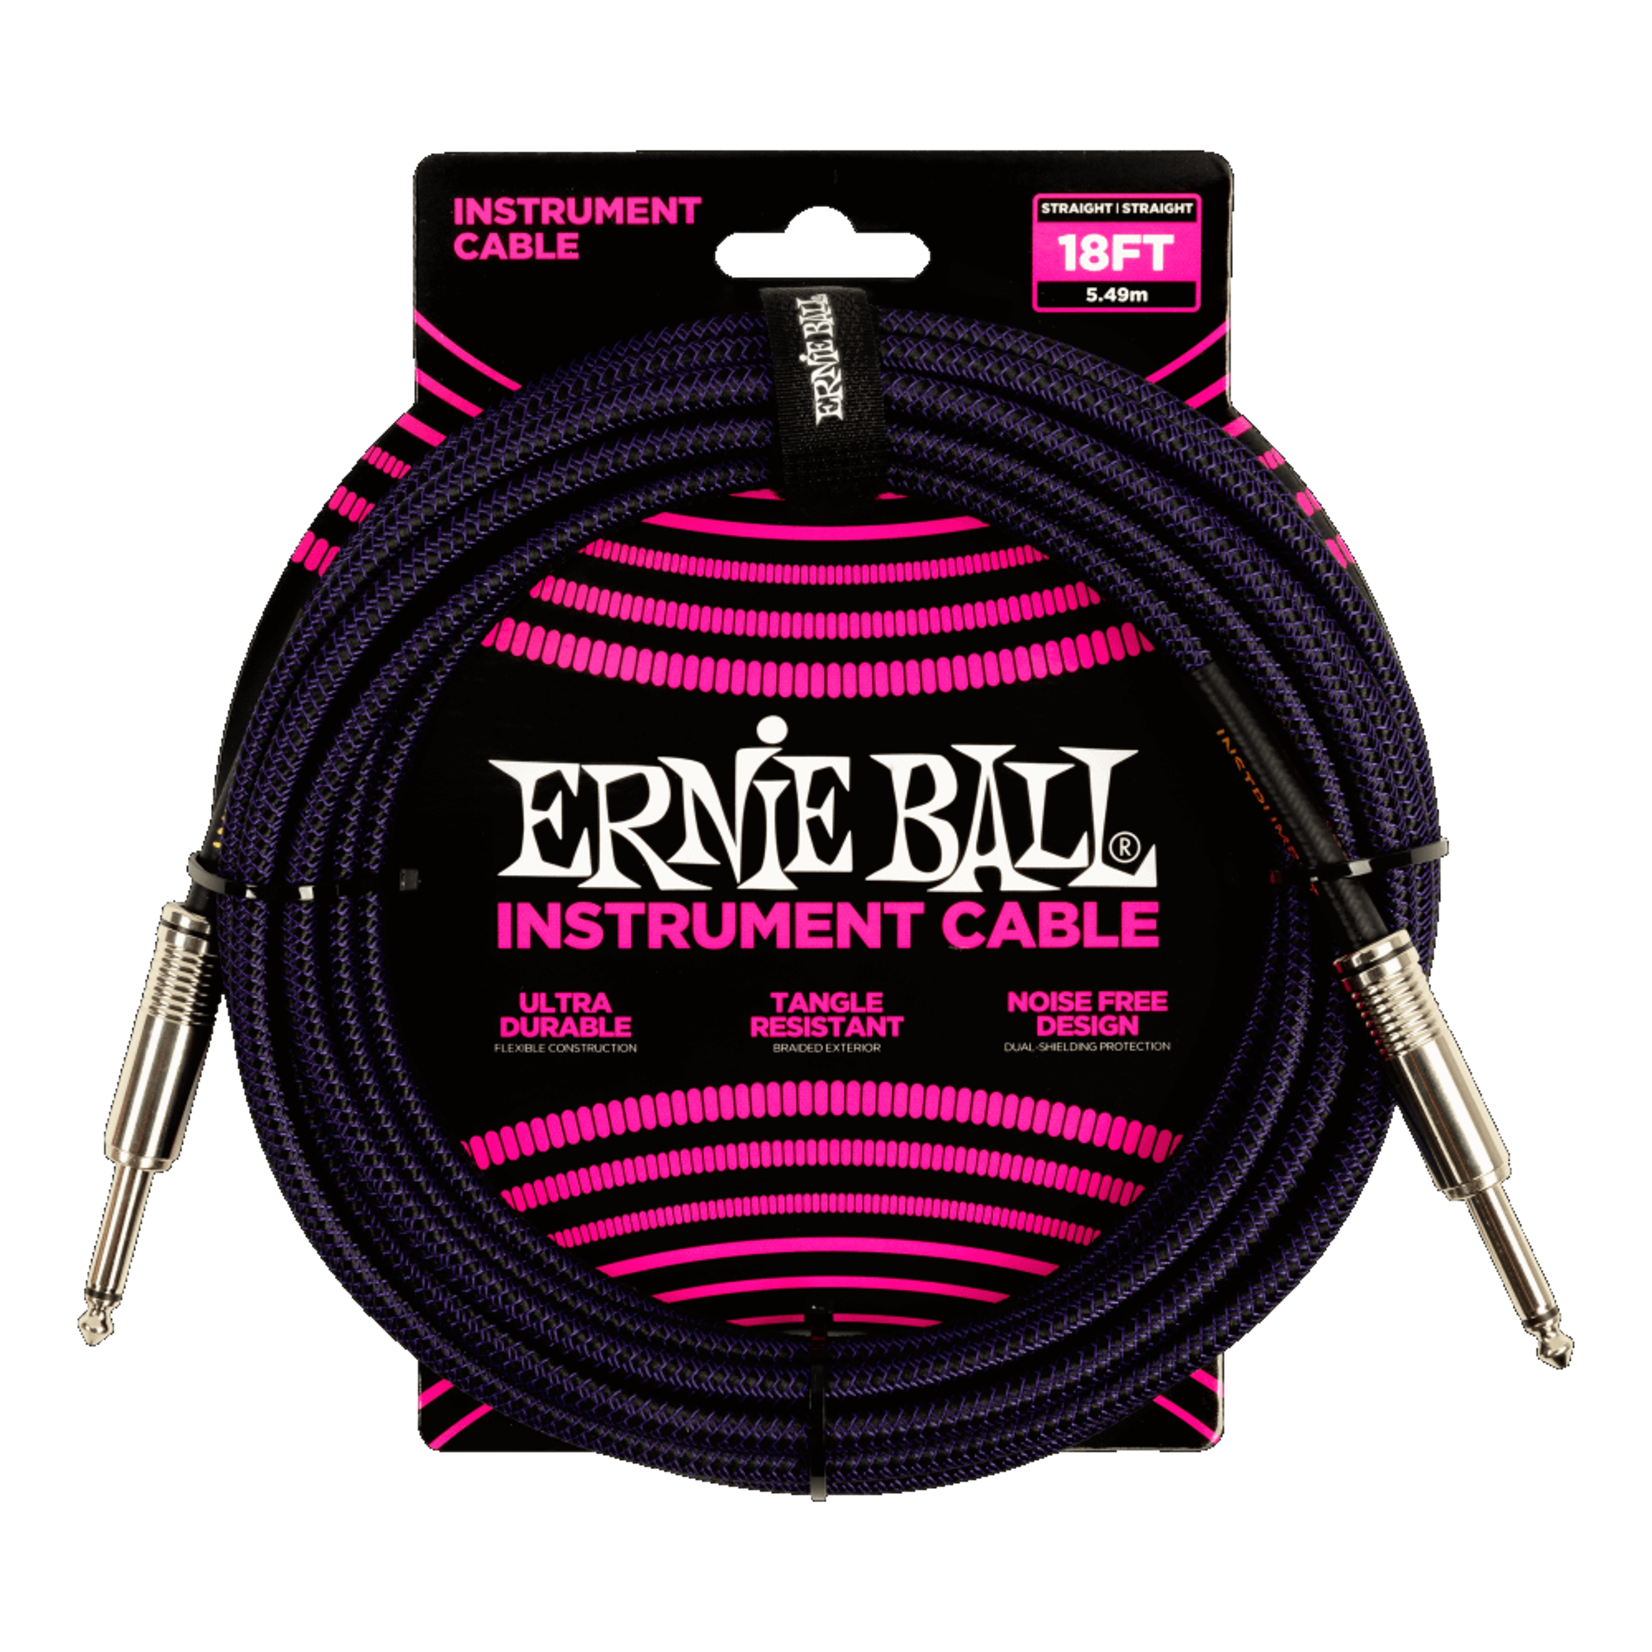 Ernie Ball Braided Instrument Cable Straight/Straight 18ft - Purple/Black